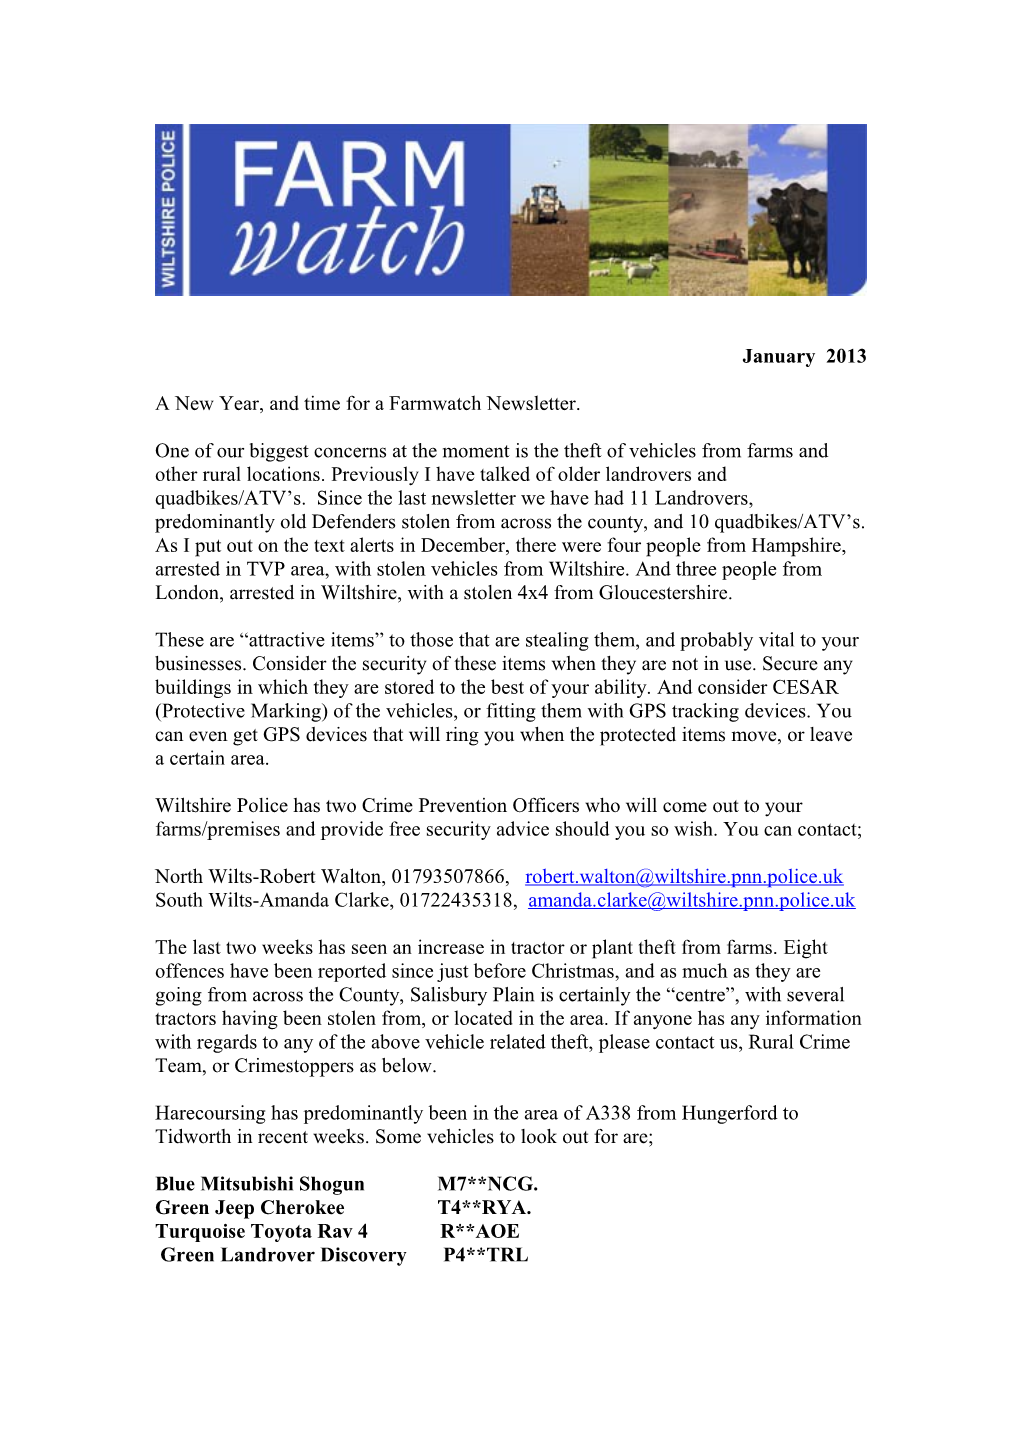 A New Year, and Time for a Farmwatch Newsletter